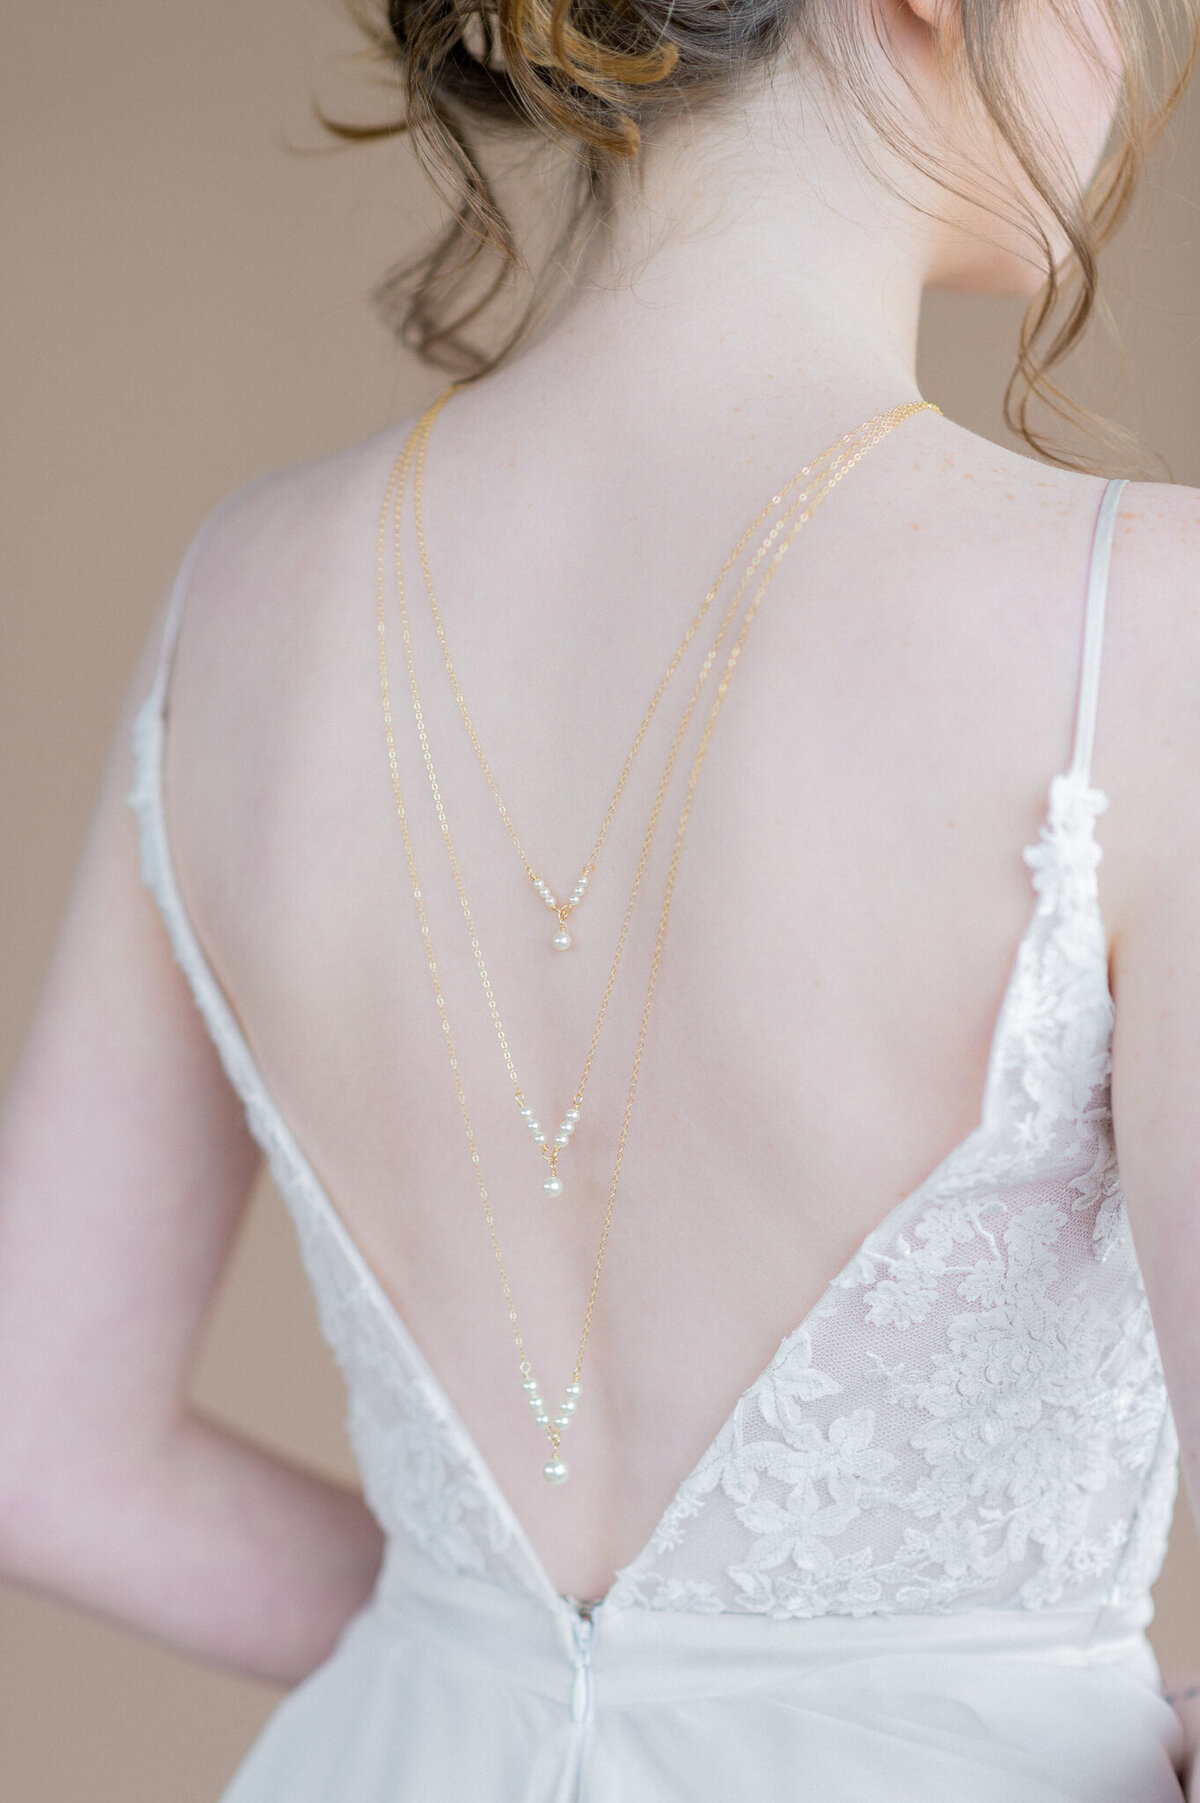 Feminine and delicate bridal accessories, by Blair Nadeau Bridal Adornments, romantic and modern wedding jewelry based in Brampton. Featured on the Brontë Bride Vendor Guide.